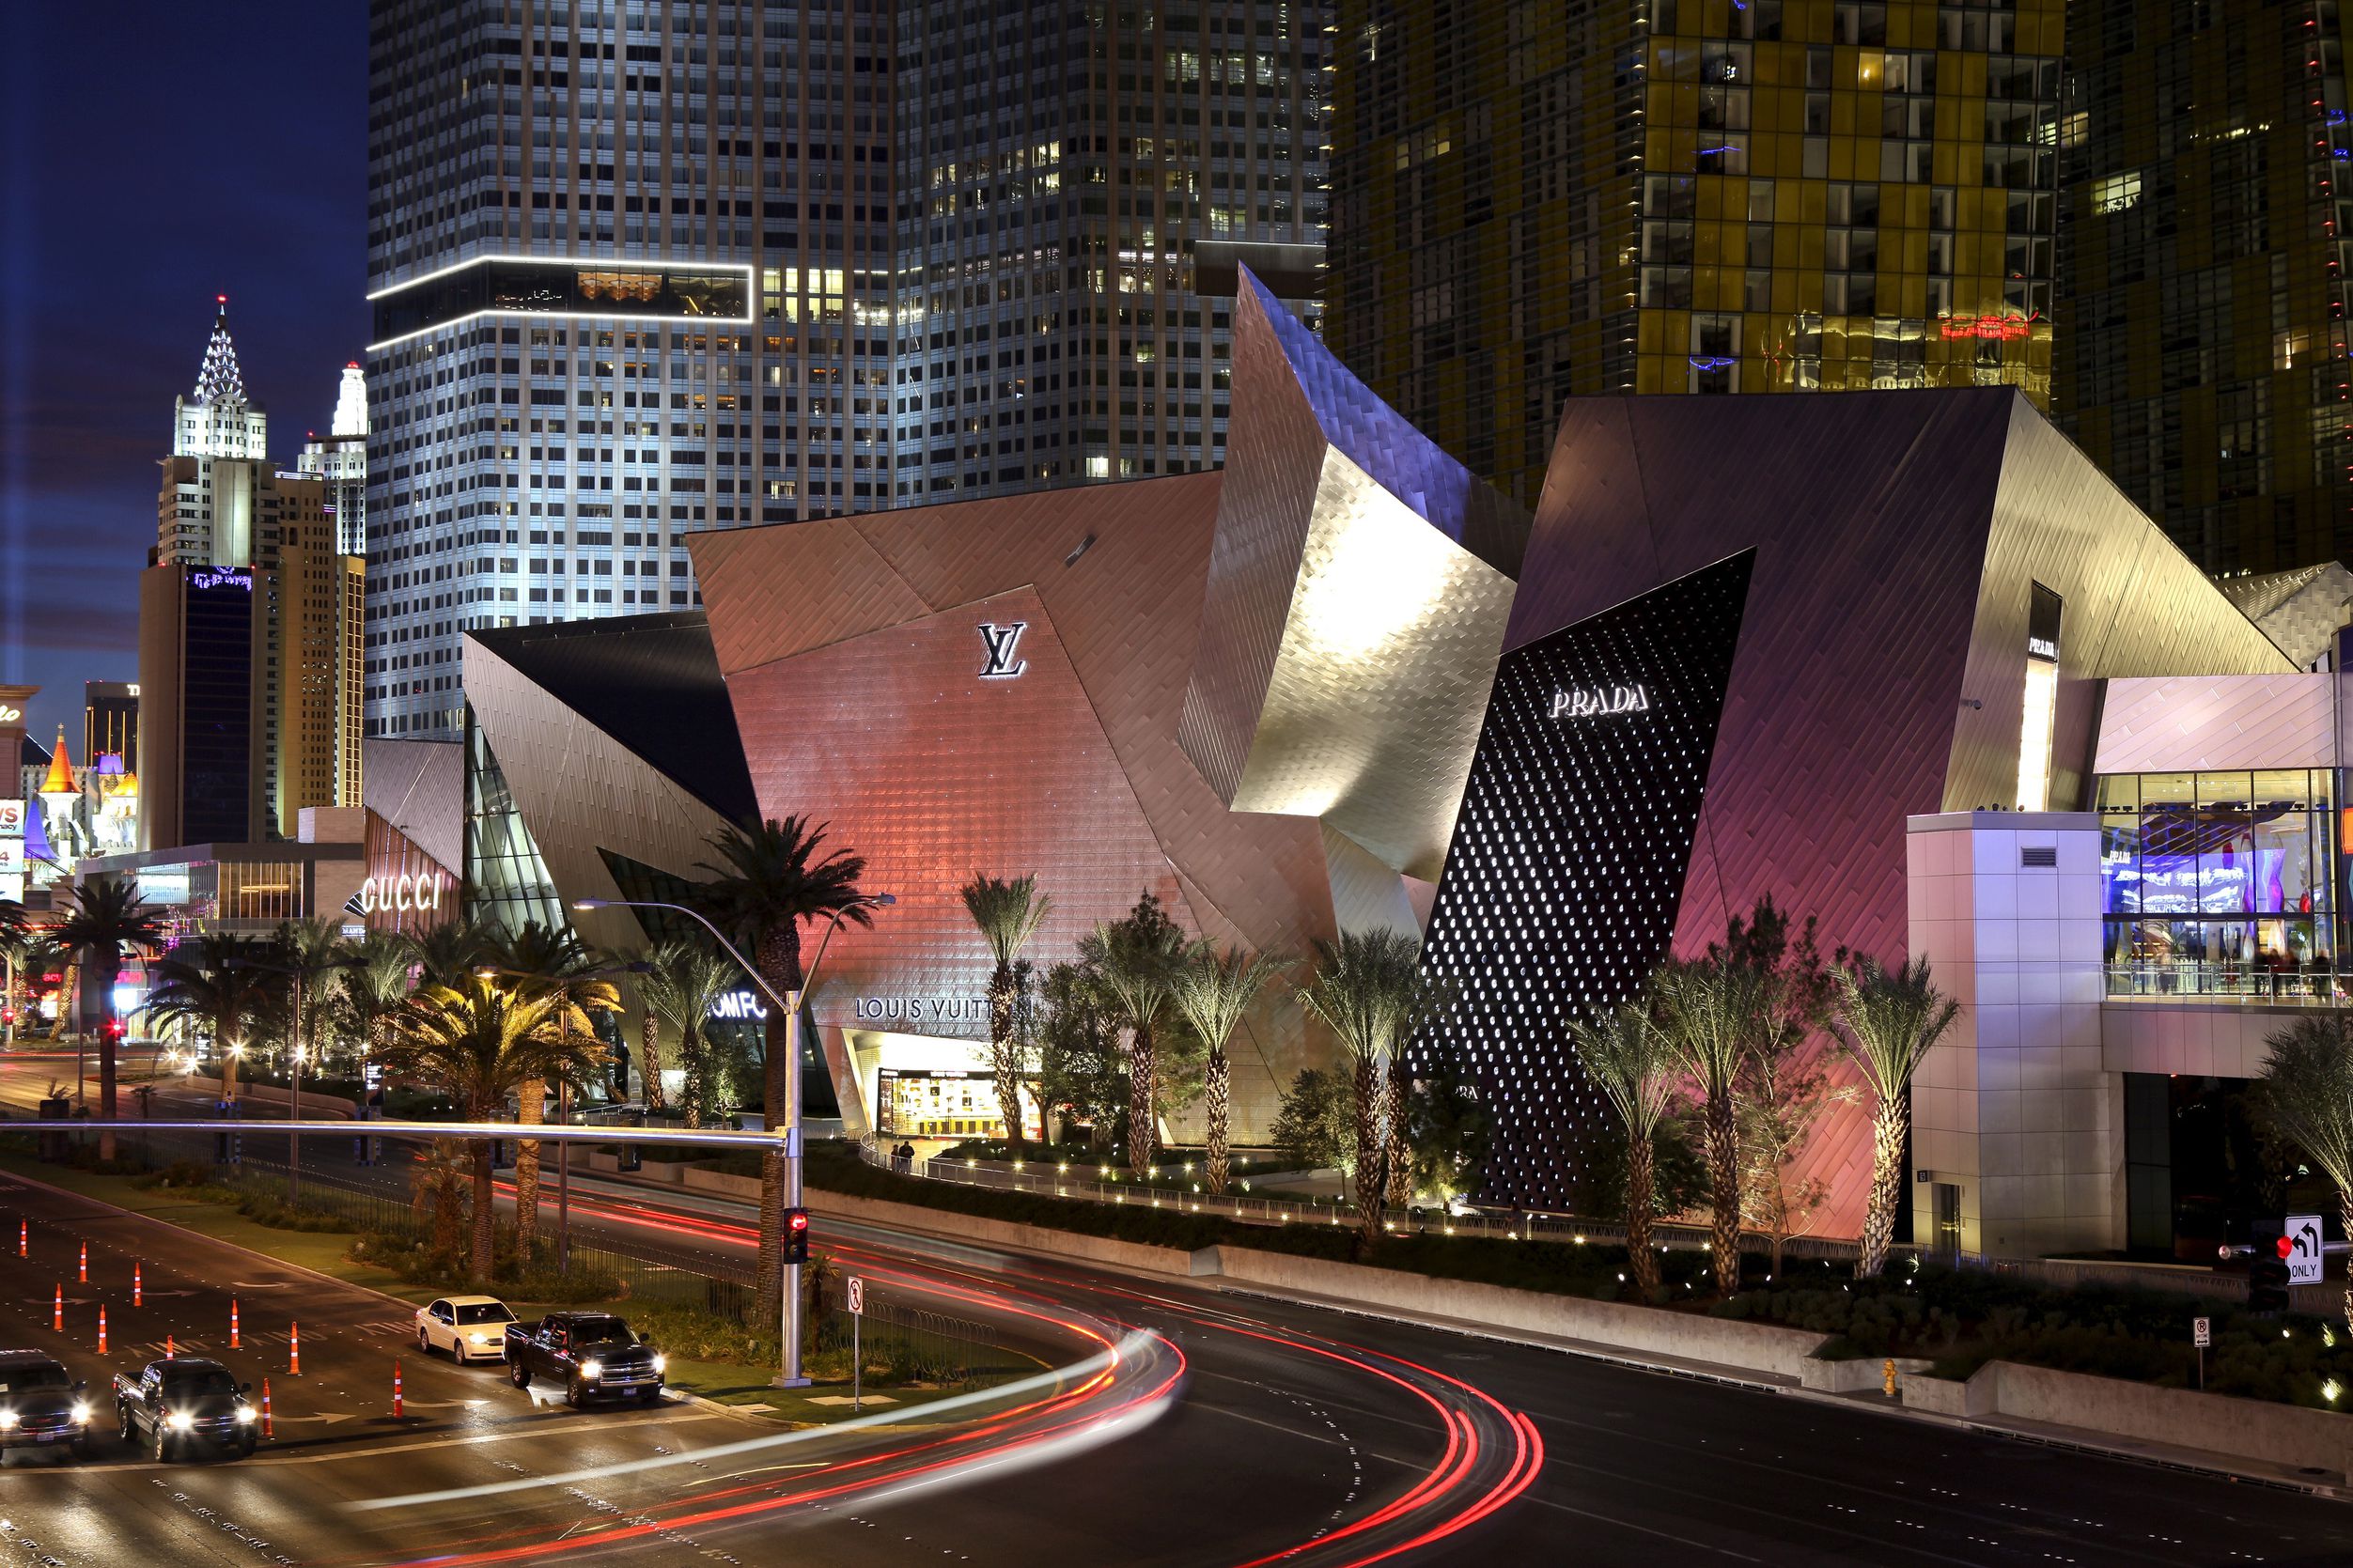 Crystals Shopping Mall with Gucci Store in Las Vegas - LAS VEGAS